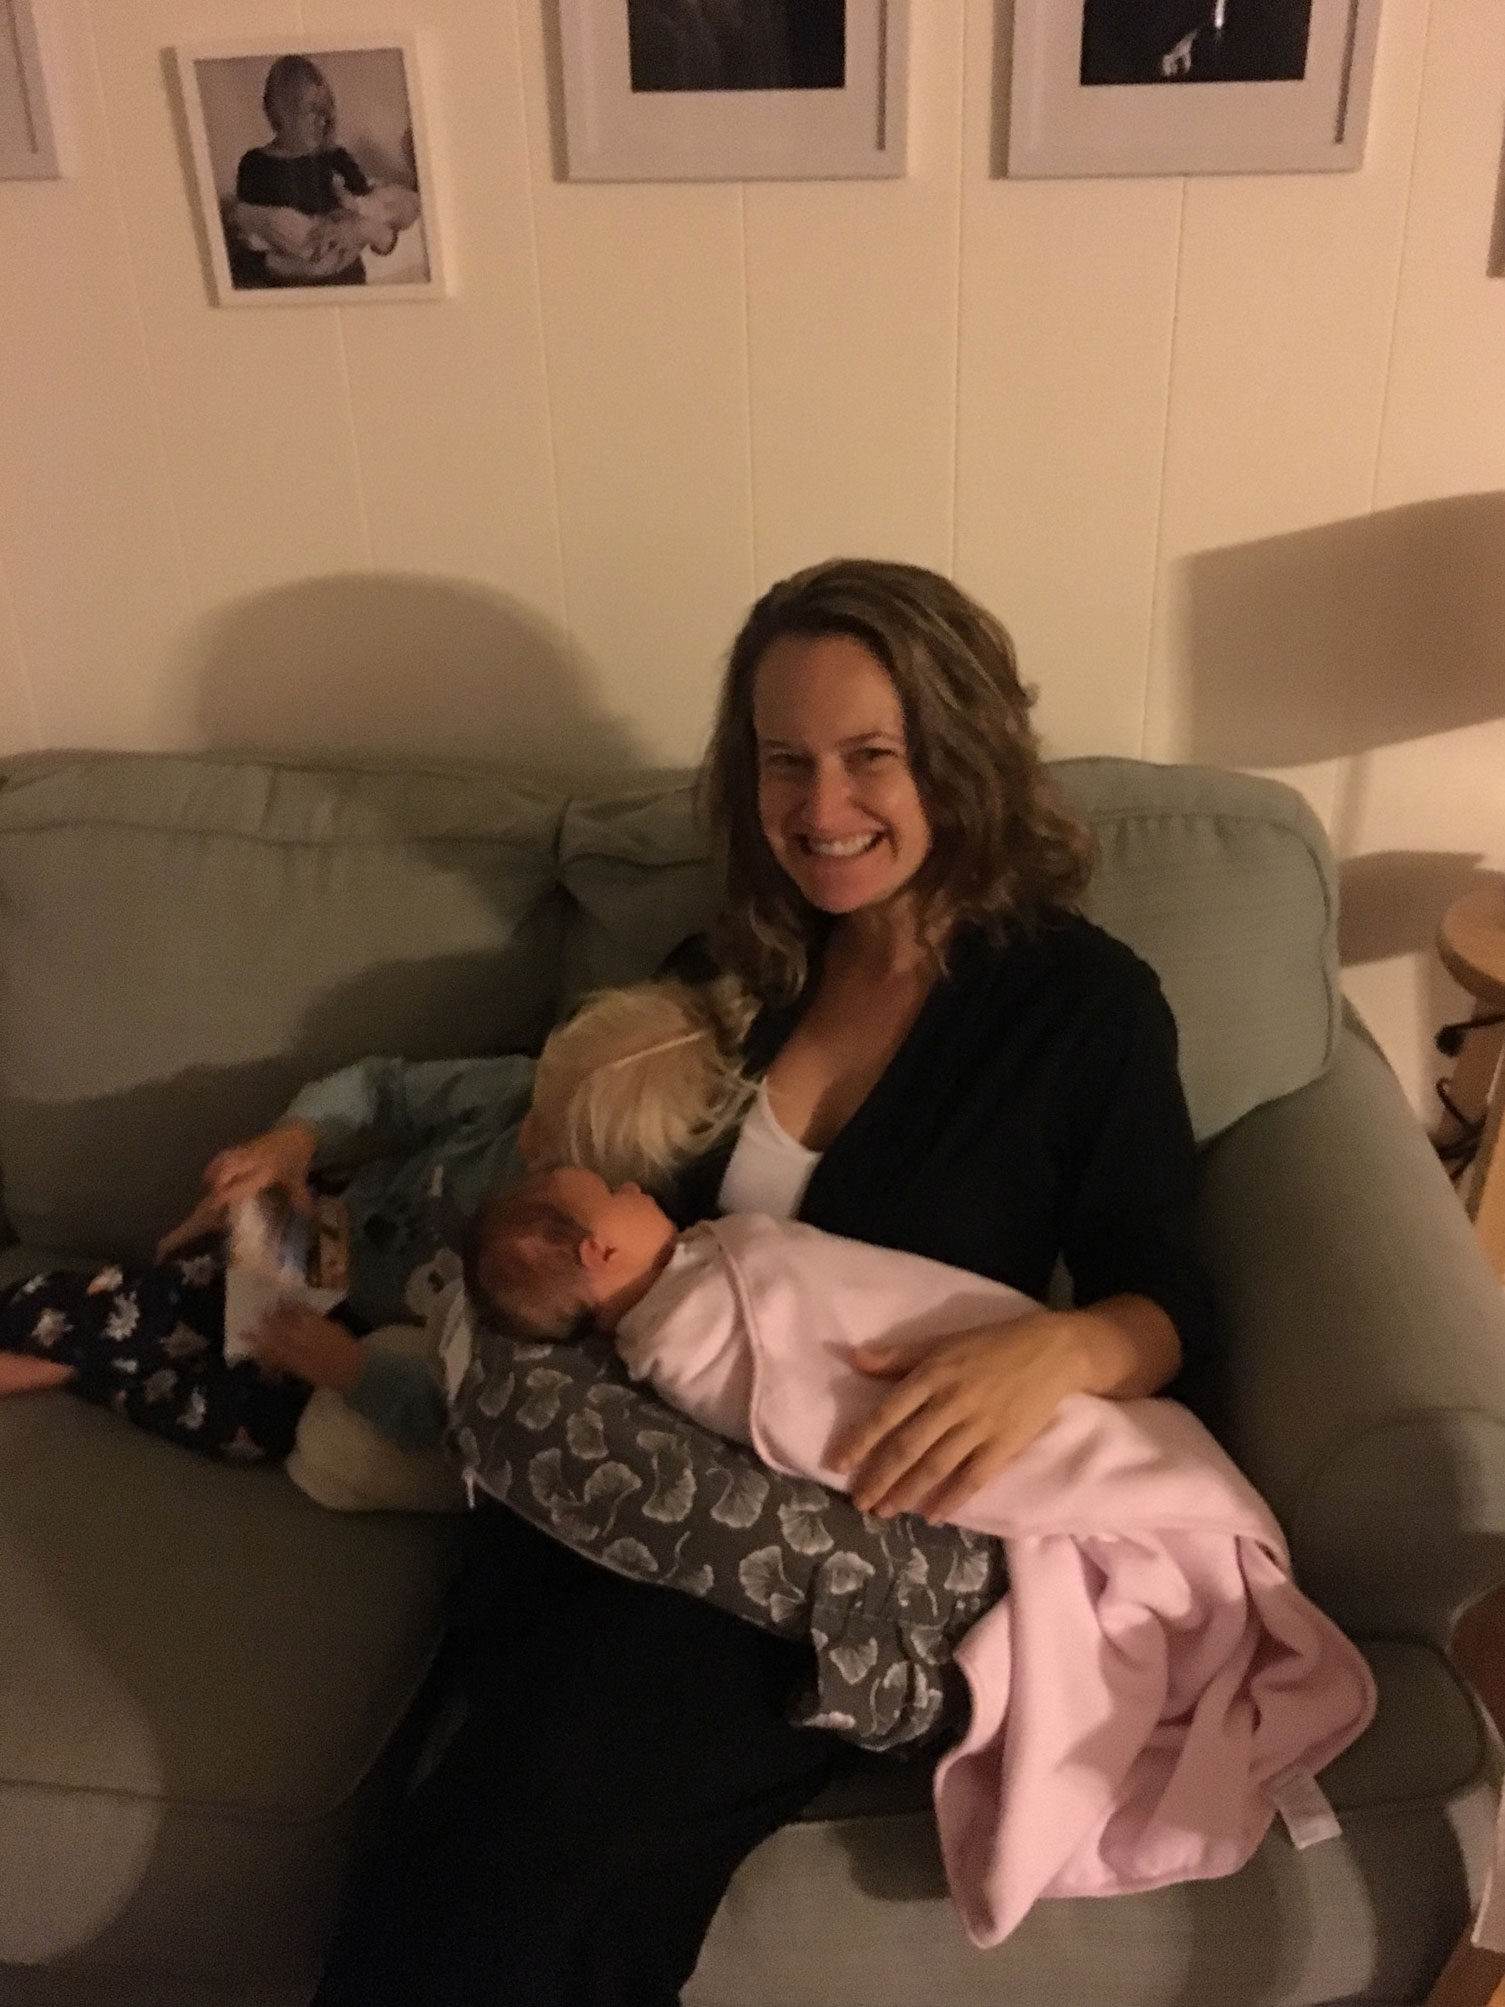 New mother holds newborn on the couch during postpartum recovery period while cuddling her toddler.